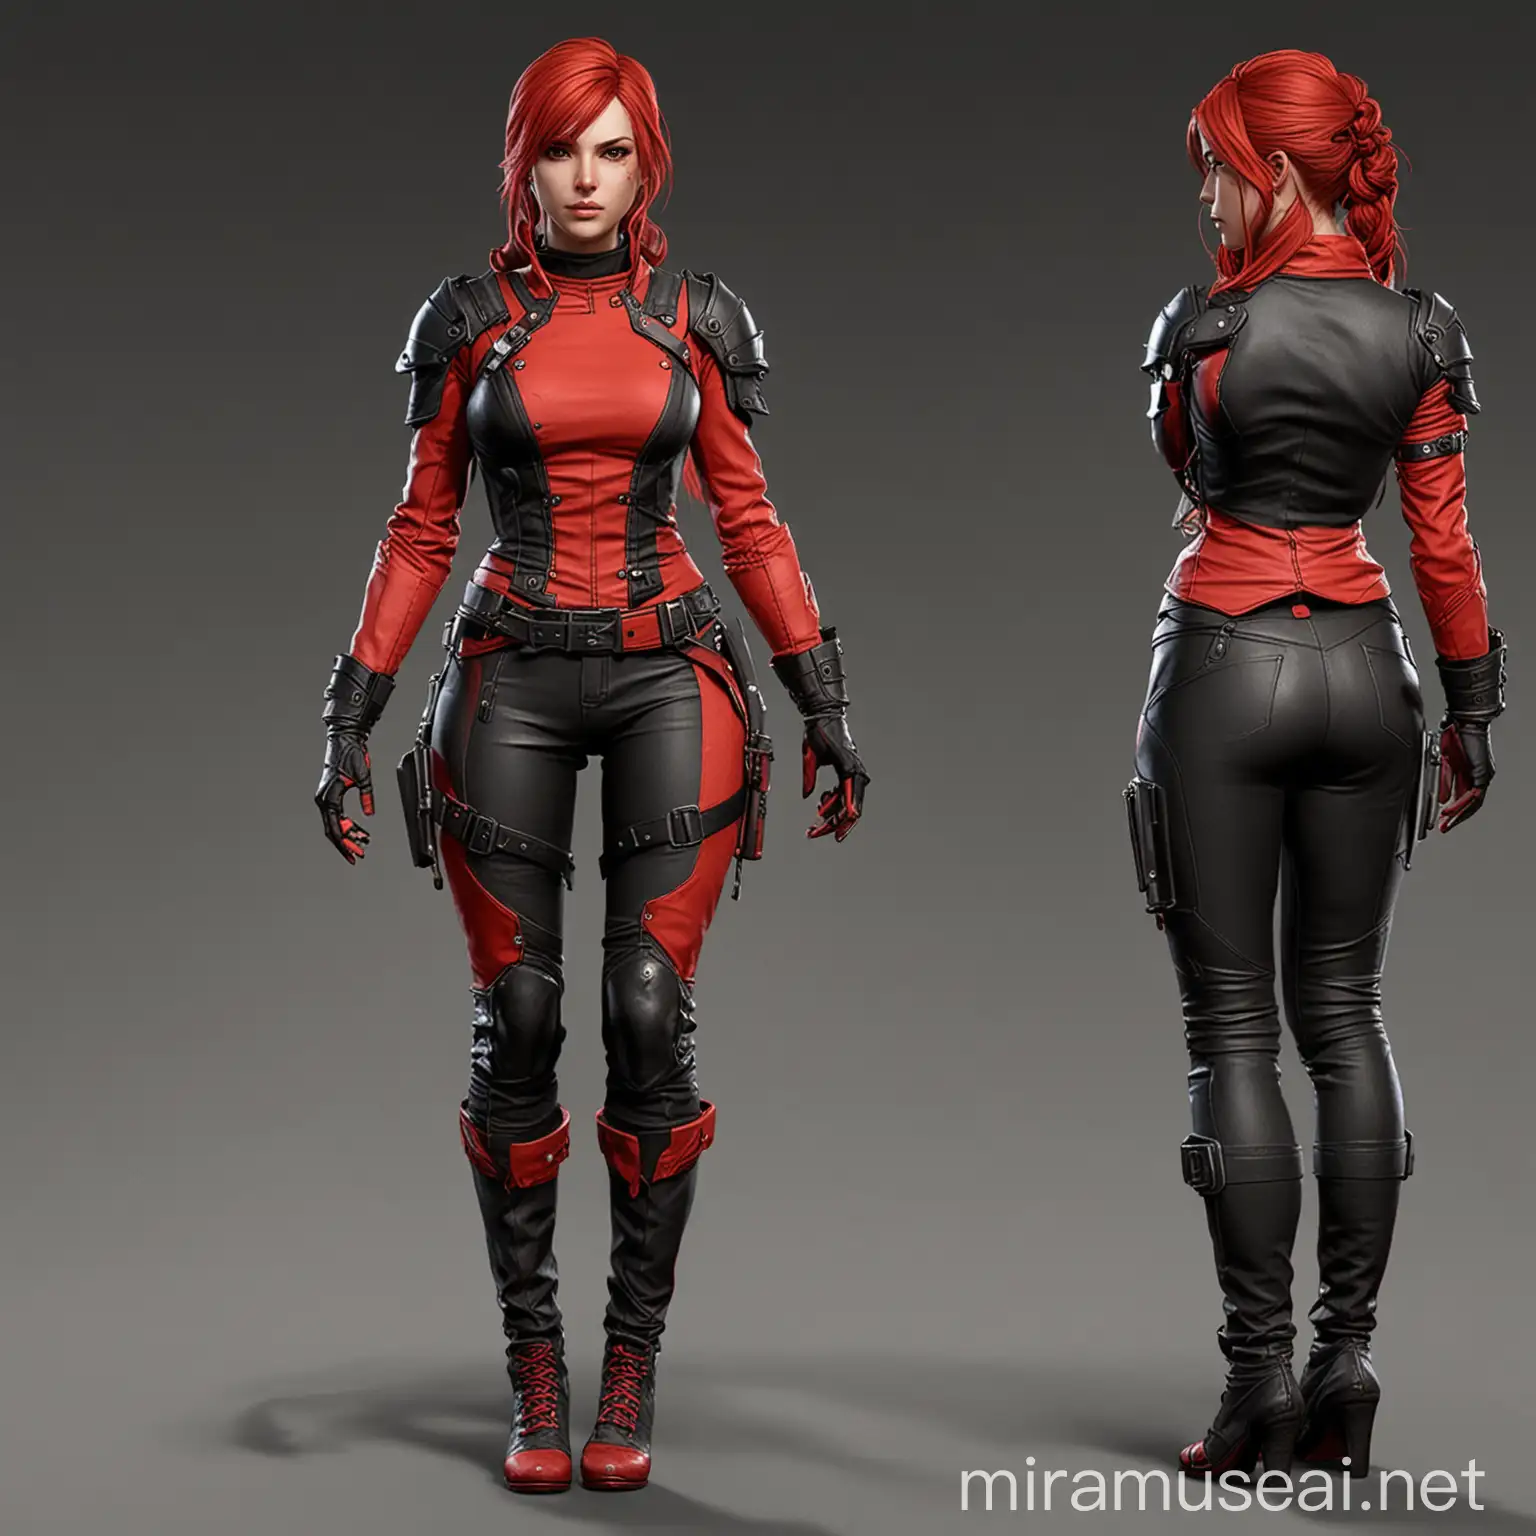 Stylish Female Game Outfit in Red and Black Color Scheme